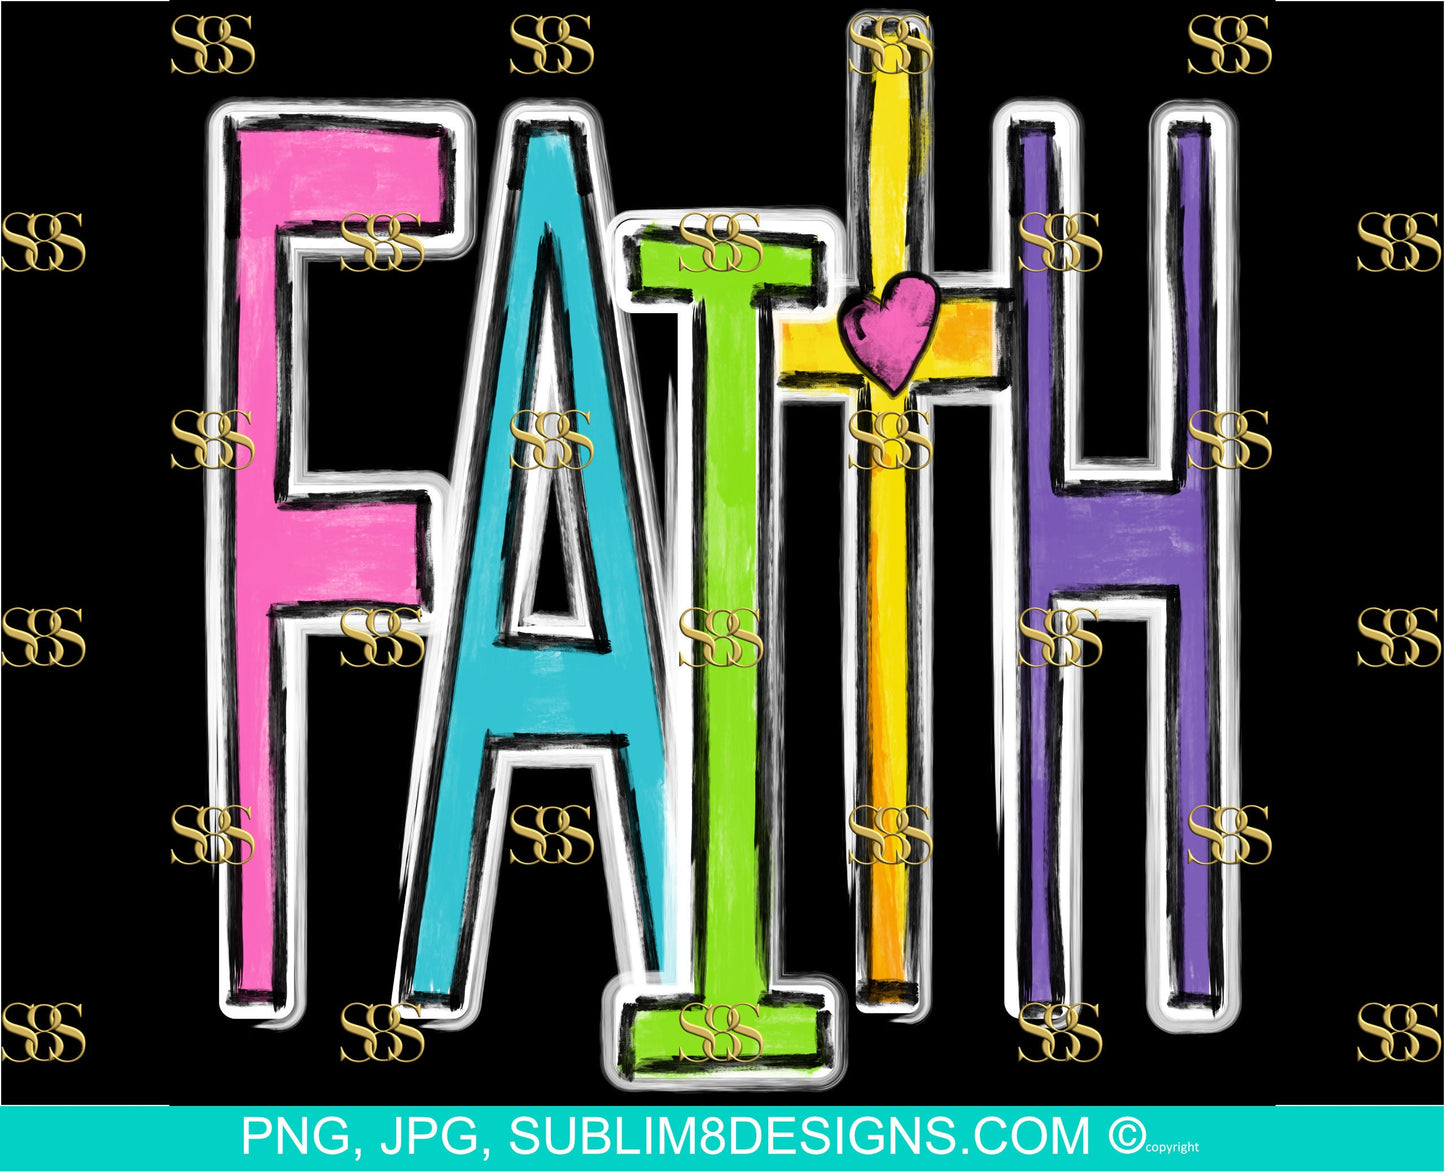 Painted Faith Bundle | Background and No Background | Faith | God | Rainbow | Colorful | Sublimation Design PNG and JPG ONLY